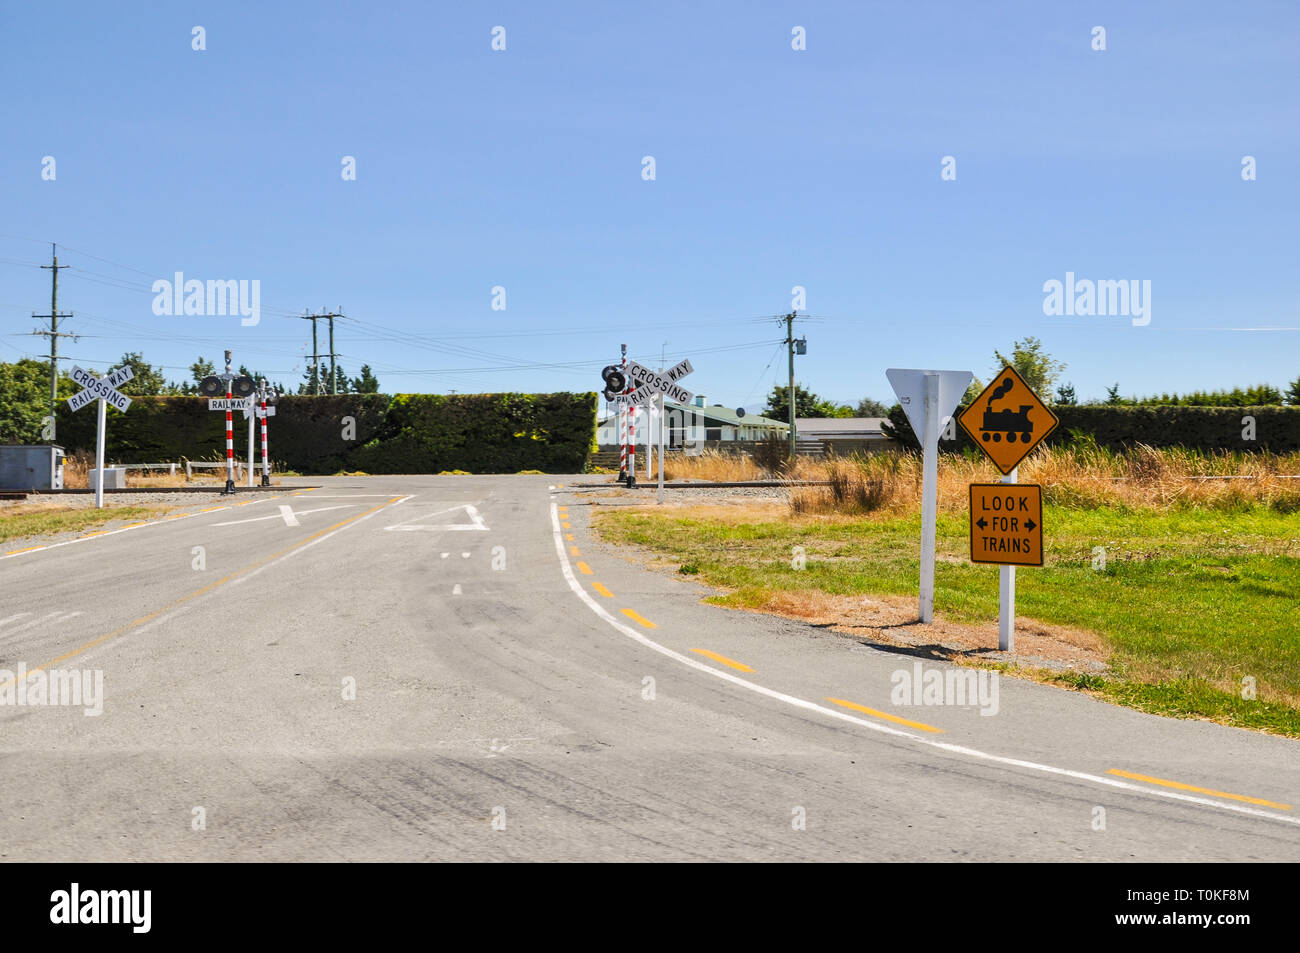 Railway crossing in the Canterbury region of New Zealand. Country crossing without gates or barrier. Look for trains sign. Steam engine graphic Stock Photo